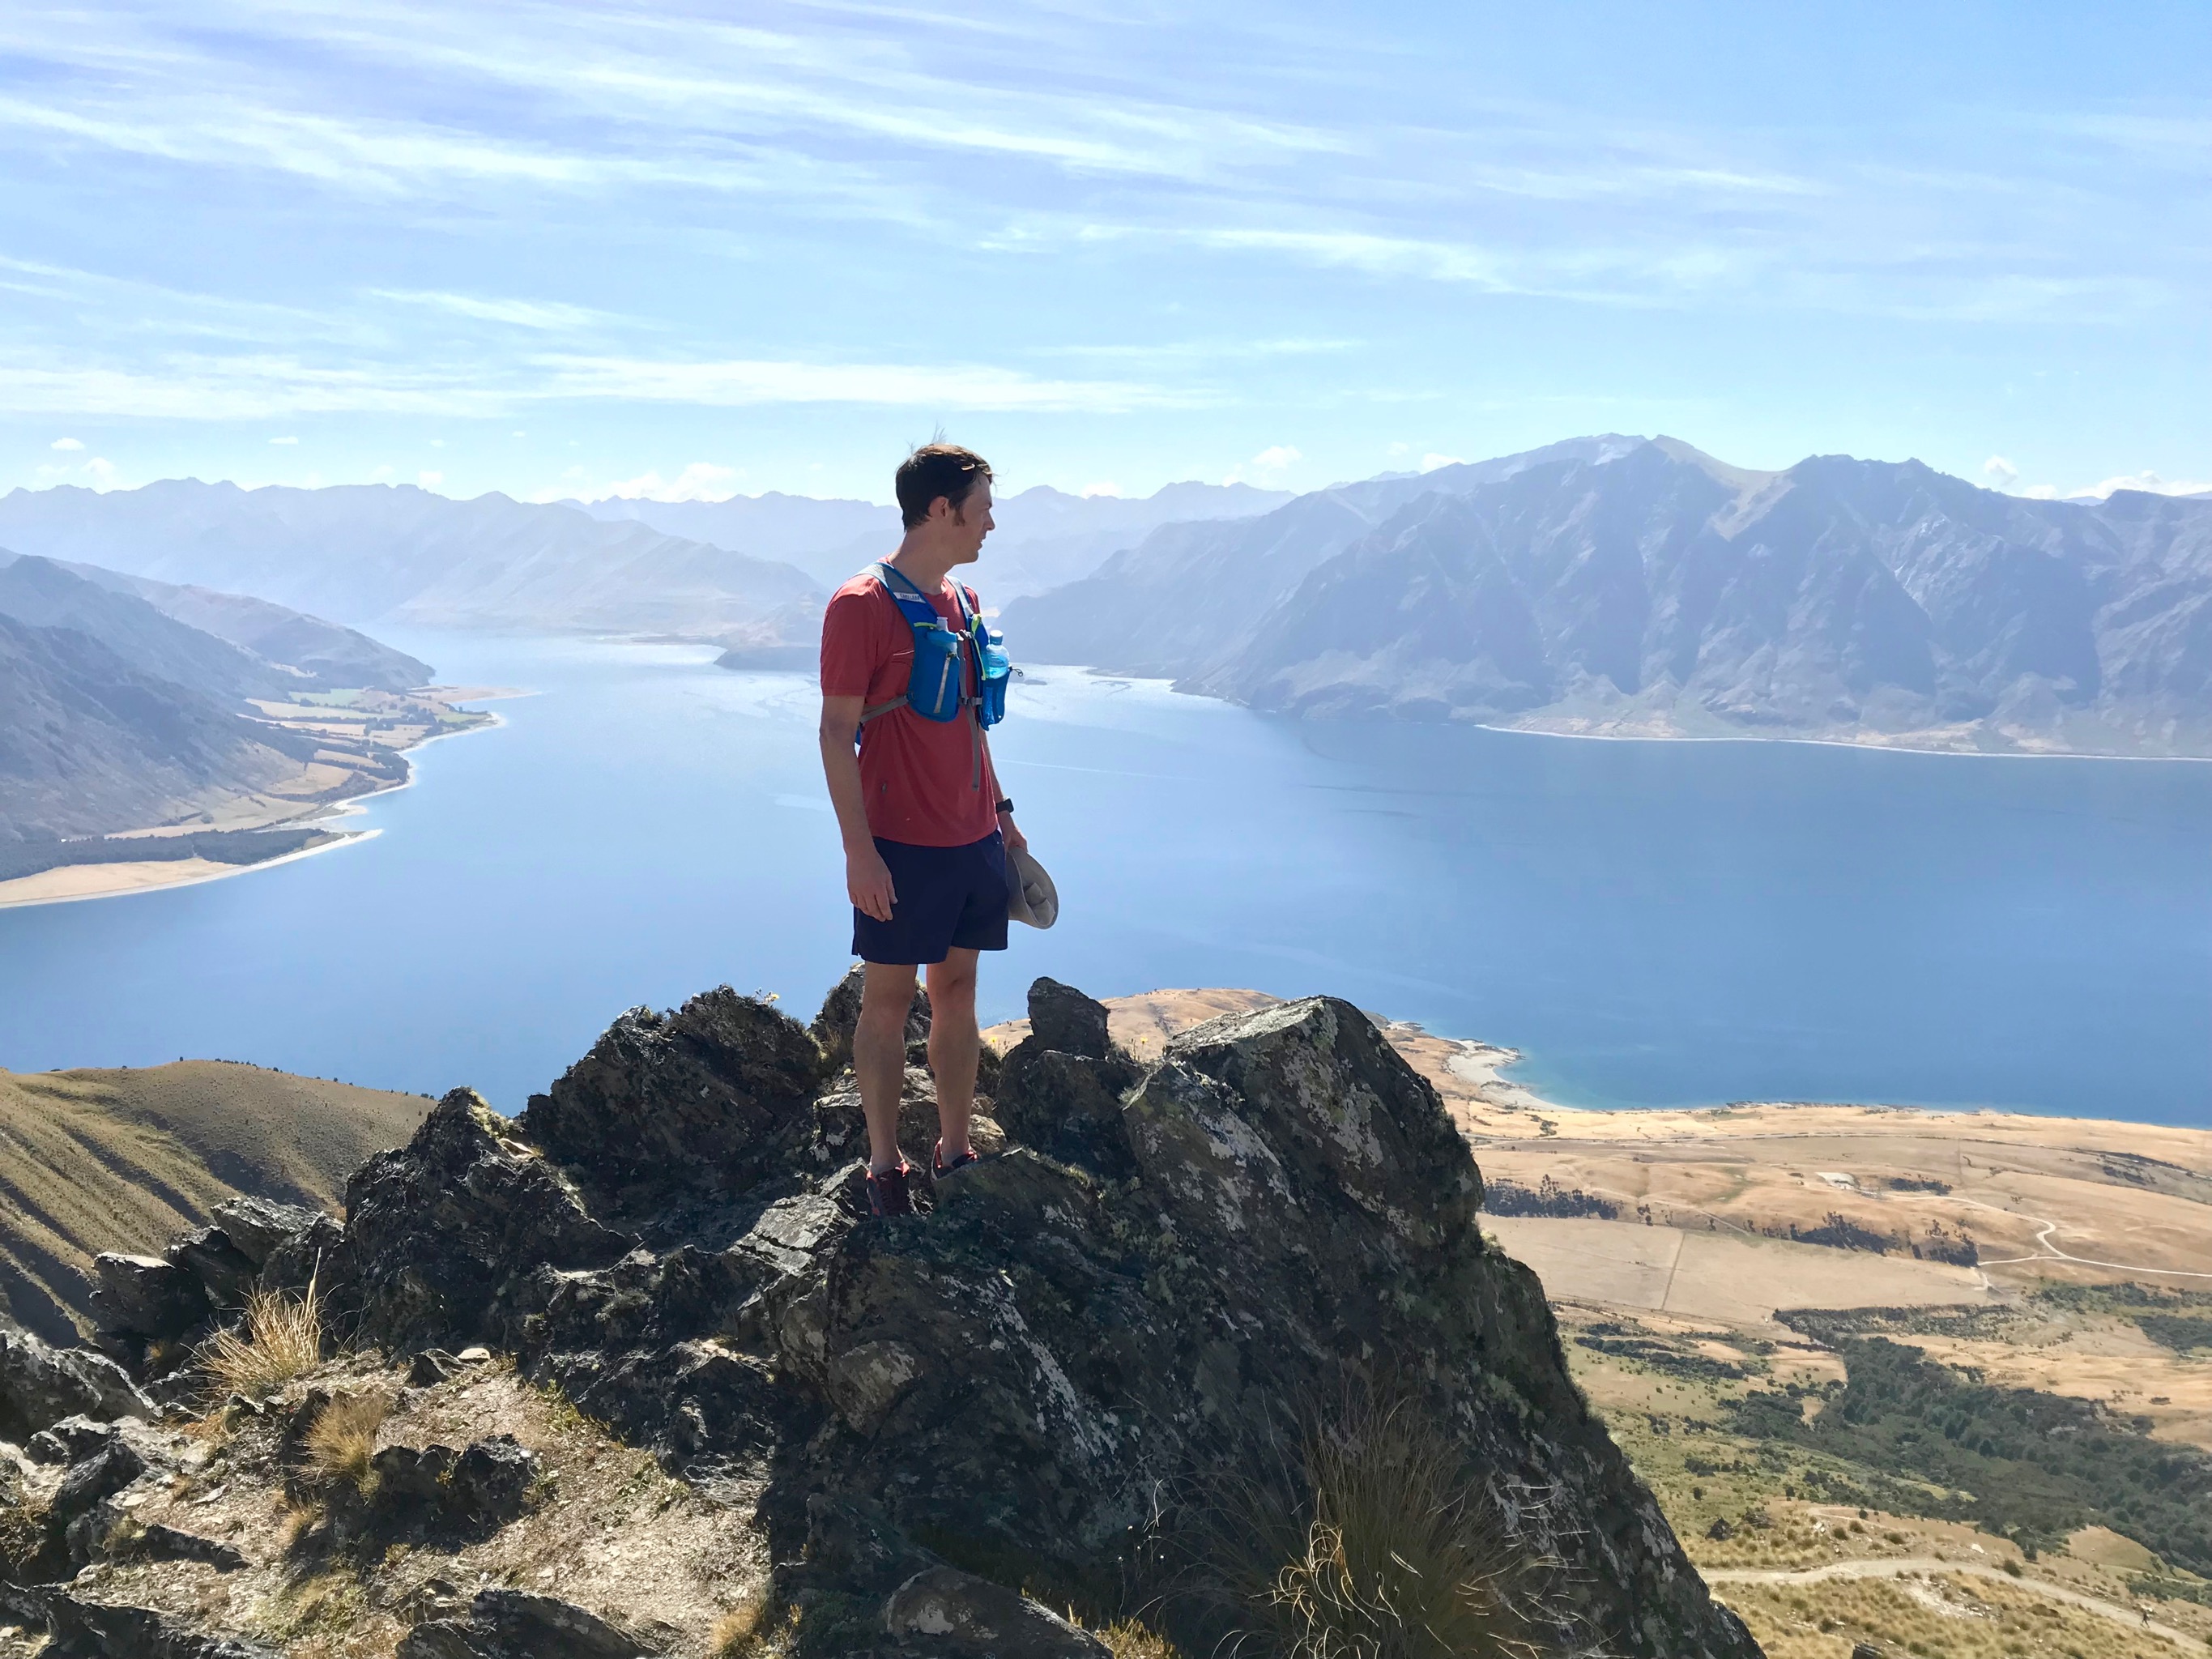 Me looking down over Lake Hawea on the way down the hill from our quick peak-bagging effort up to Isthmus Peak.